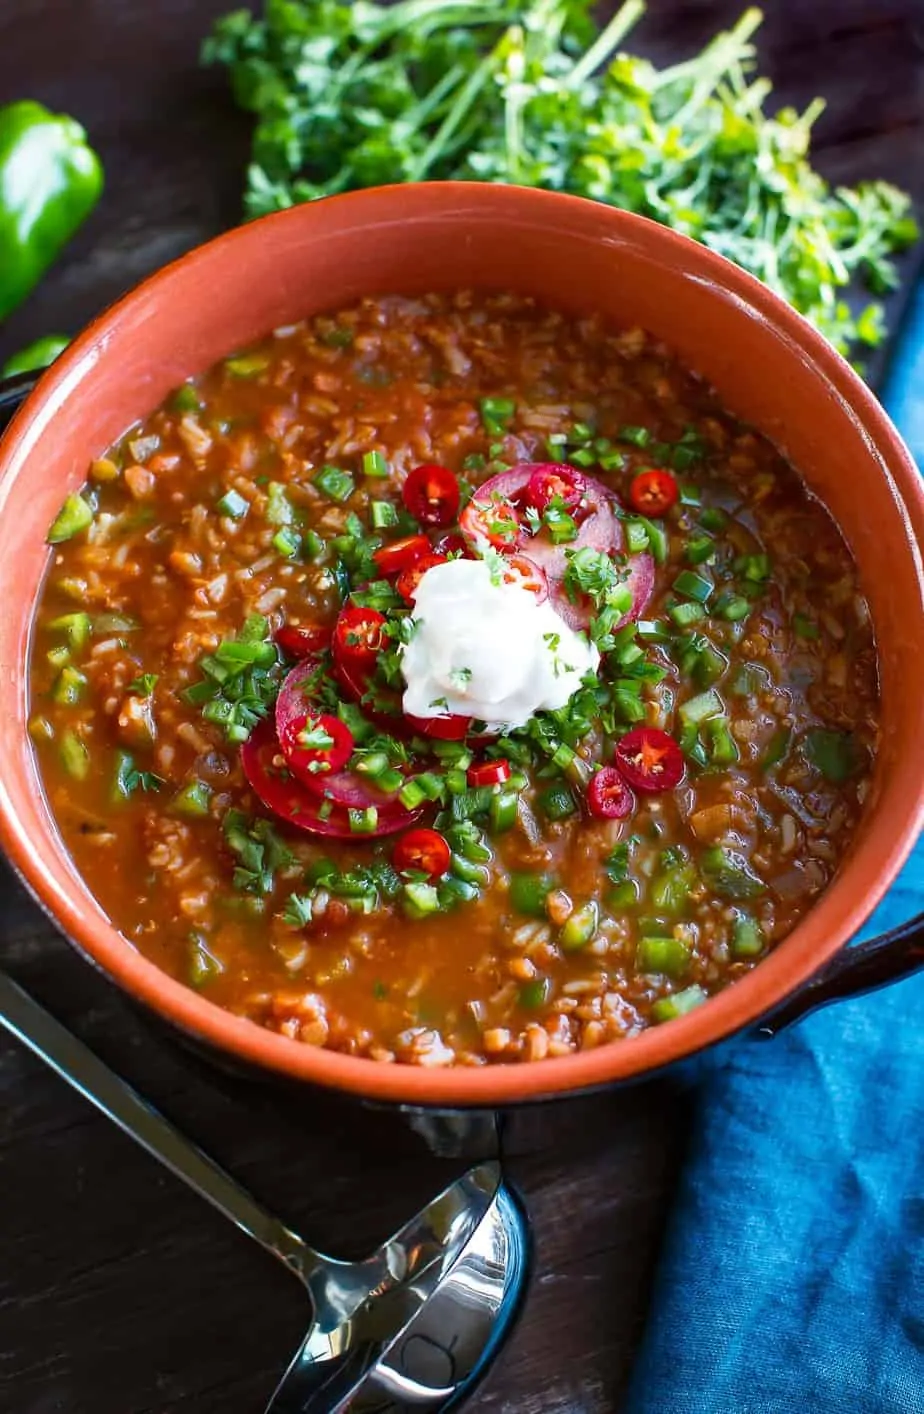 Vegan Stuffed Pepper Soup with Red Lentils